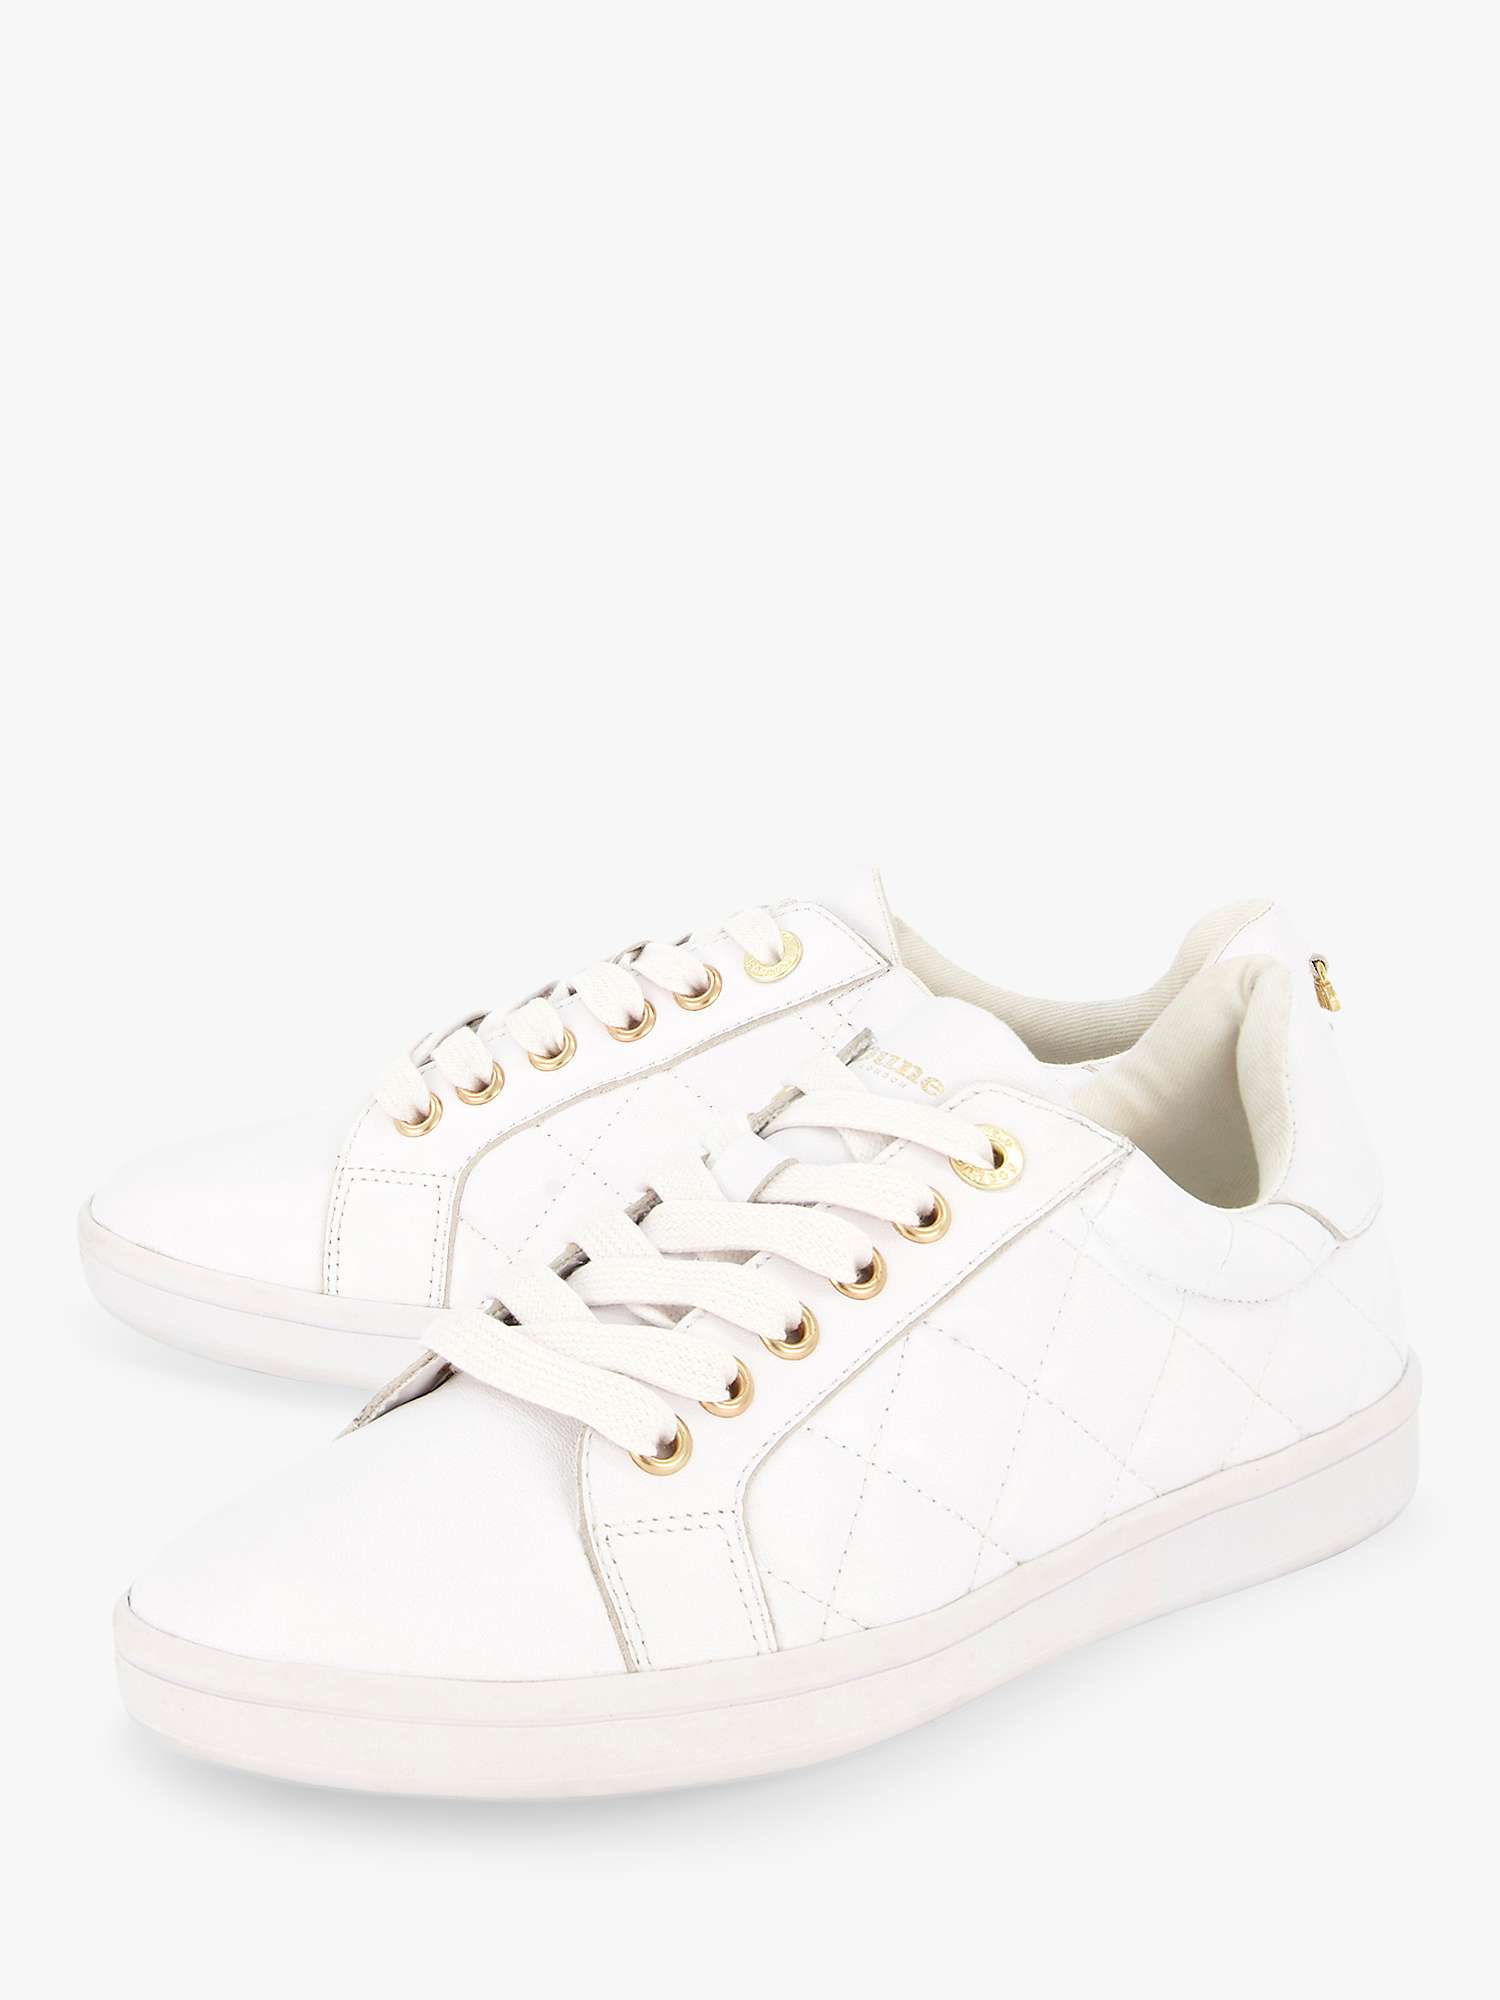 Dune Excited Leather Trainers, White at John Lewis & Partners